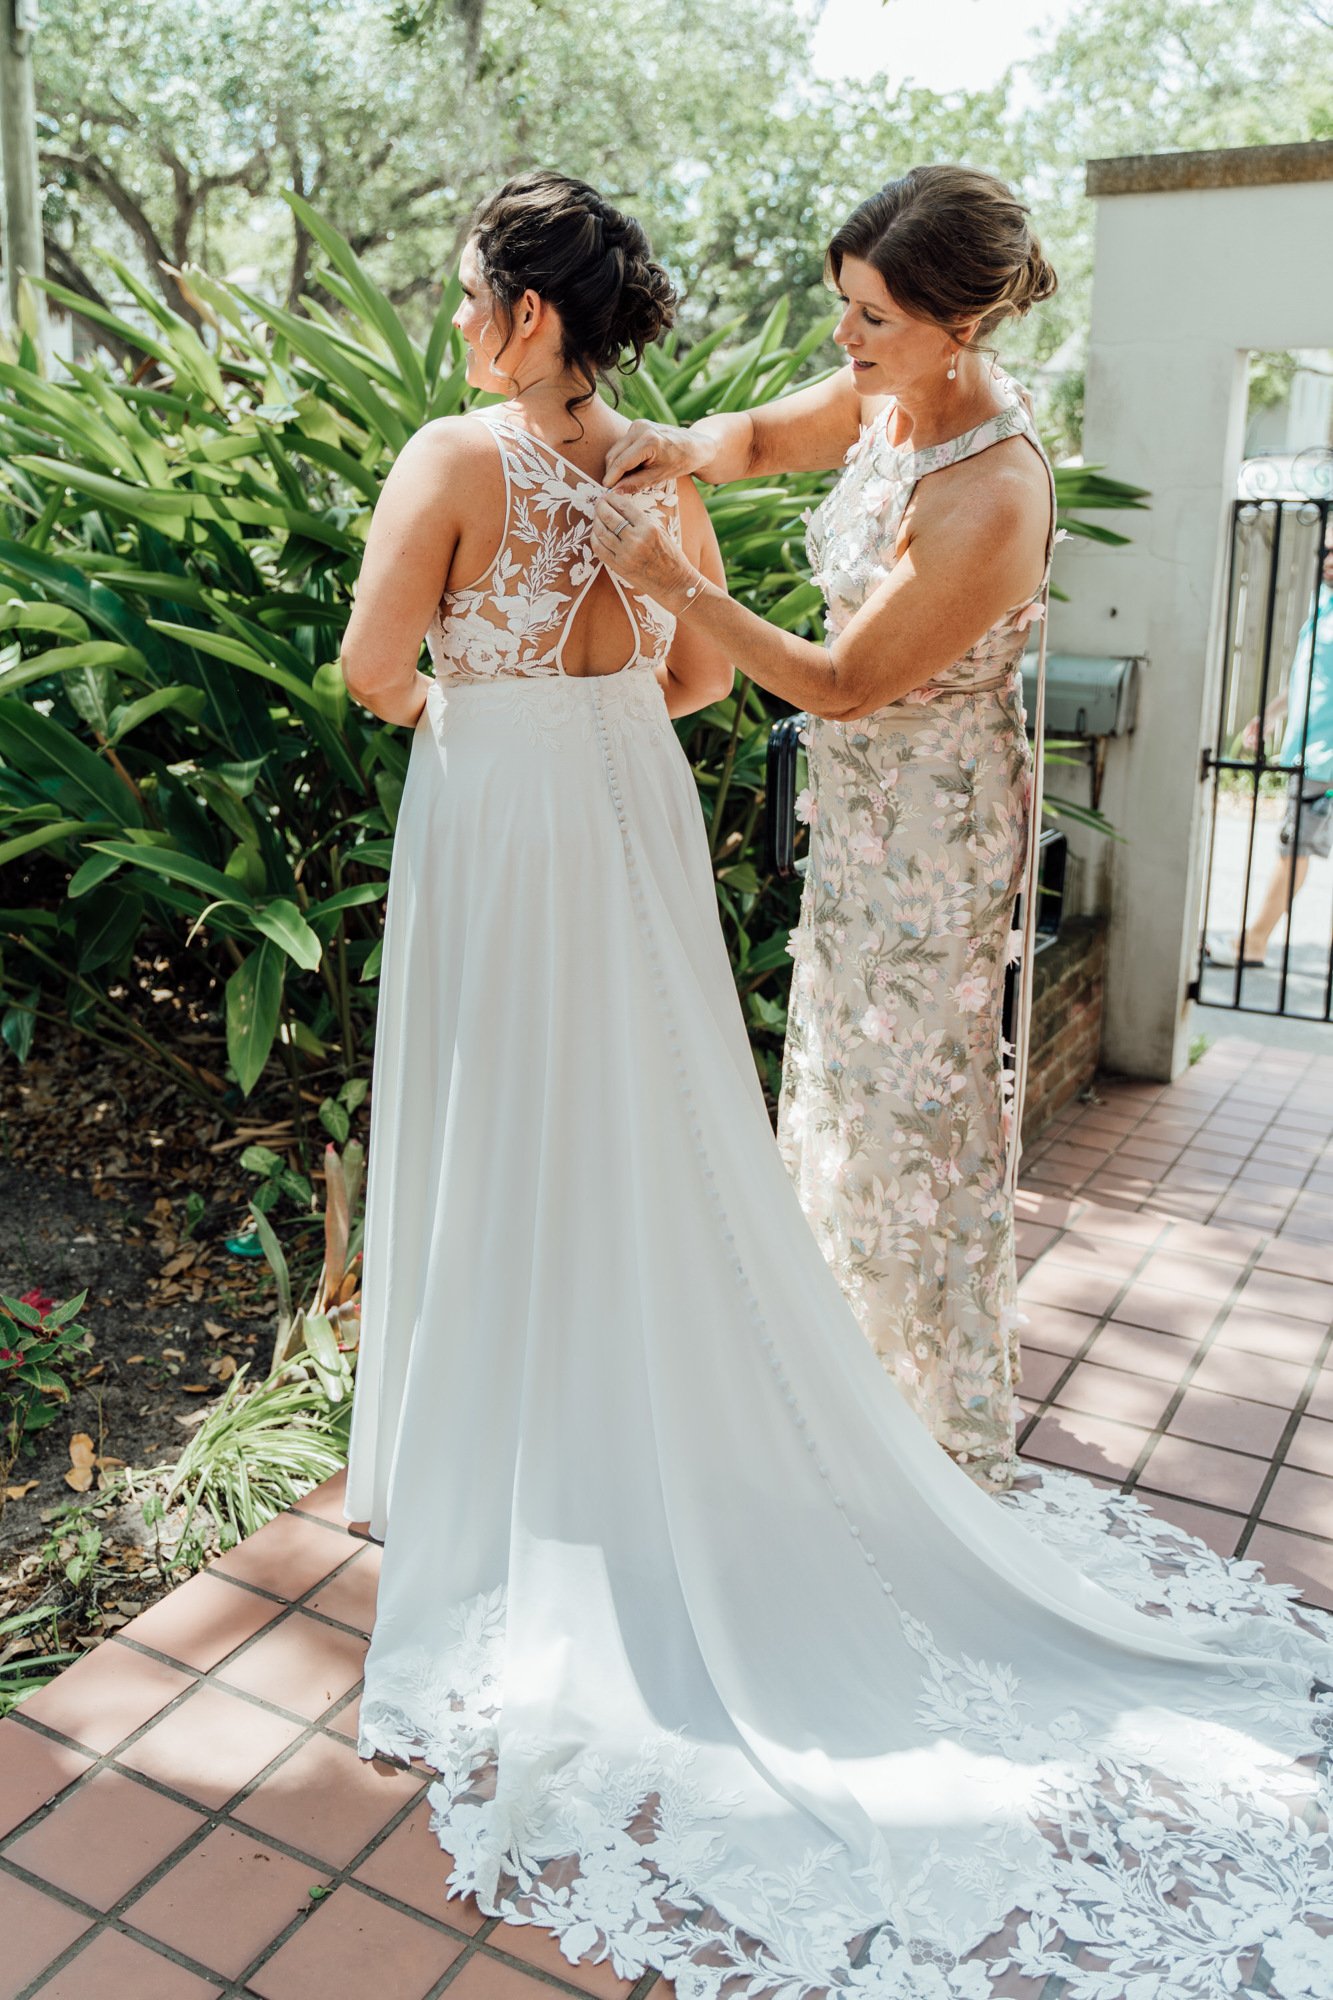 Southern Palms Studio bride with gorgeous dress before wedding ceremony in St. Augustine, FL.jpg